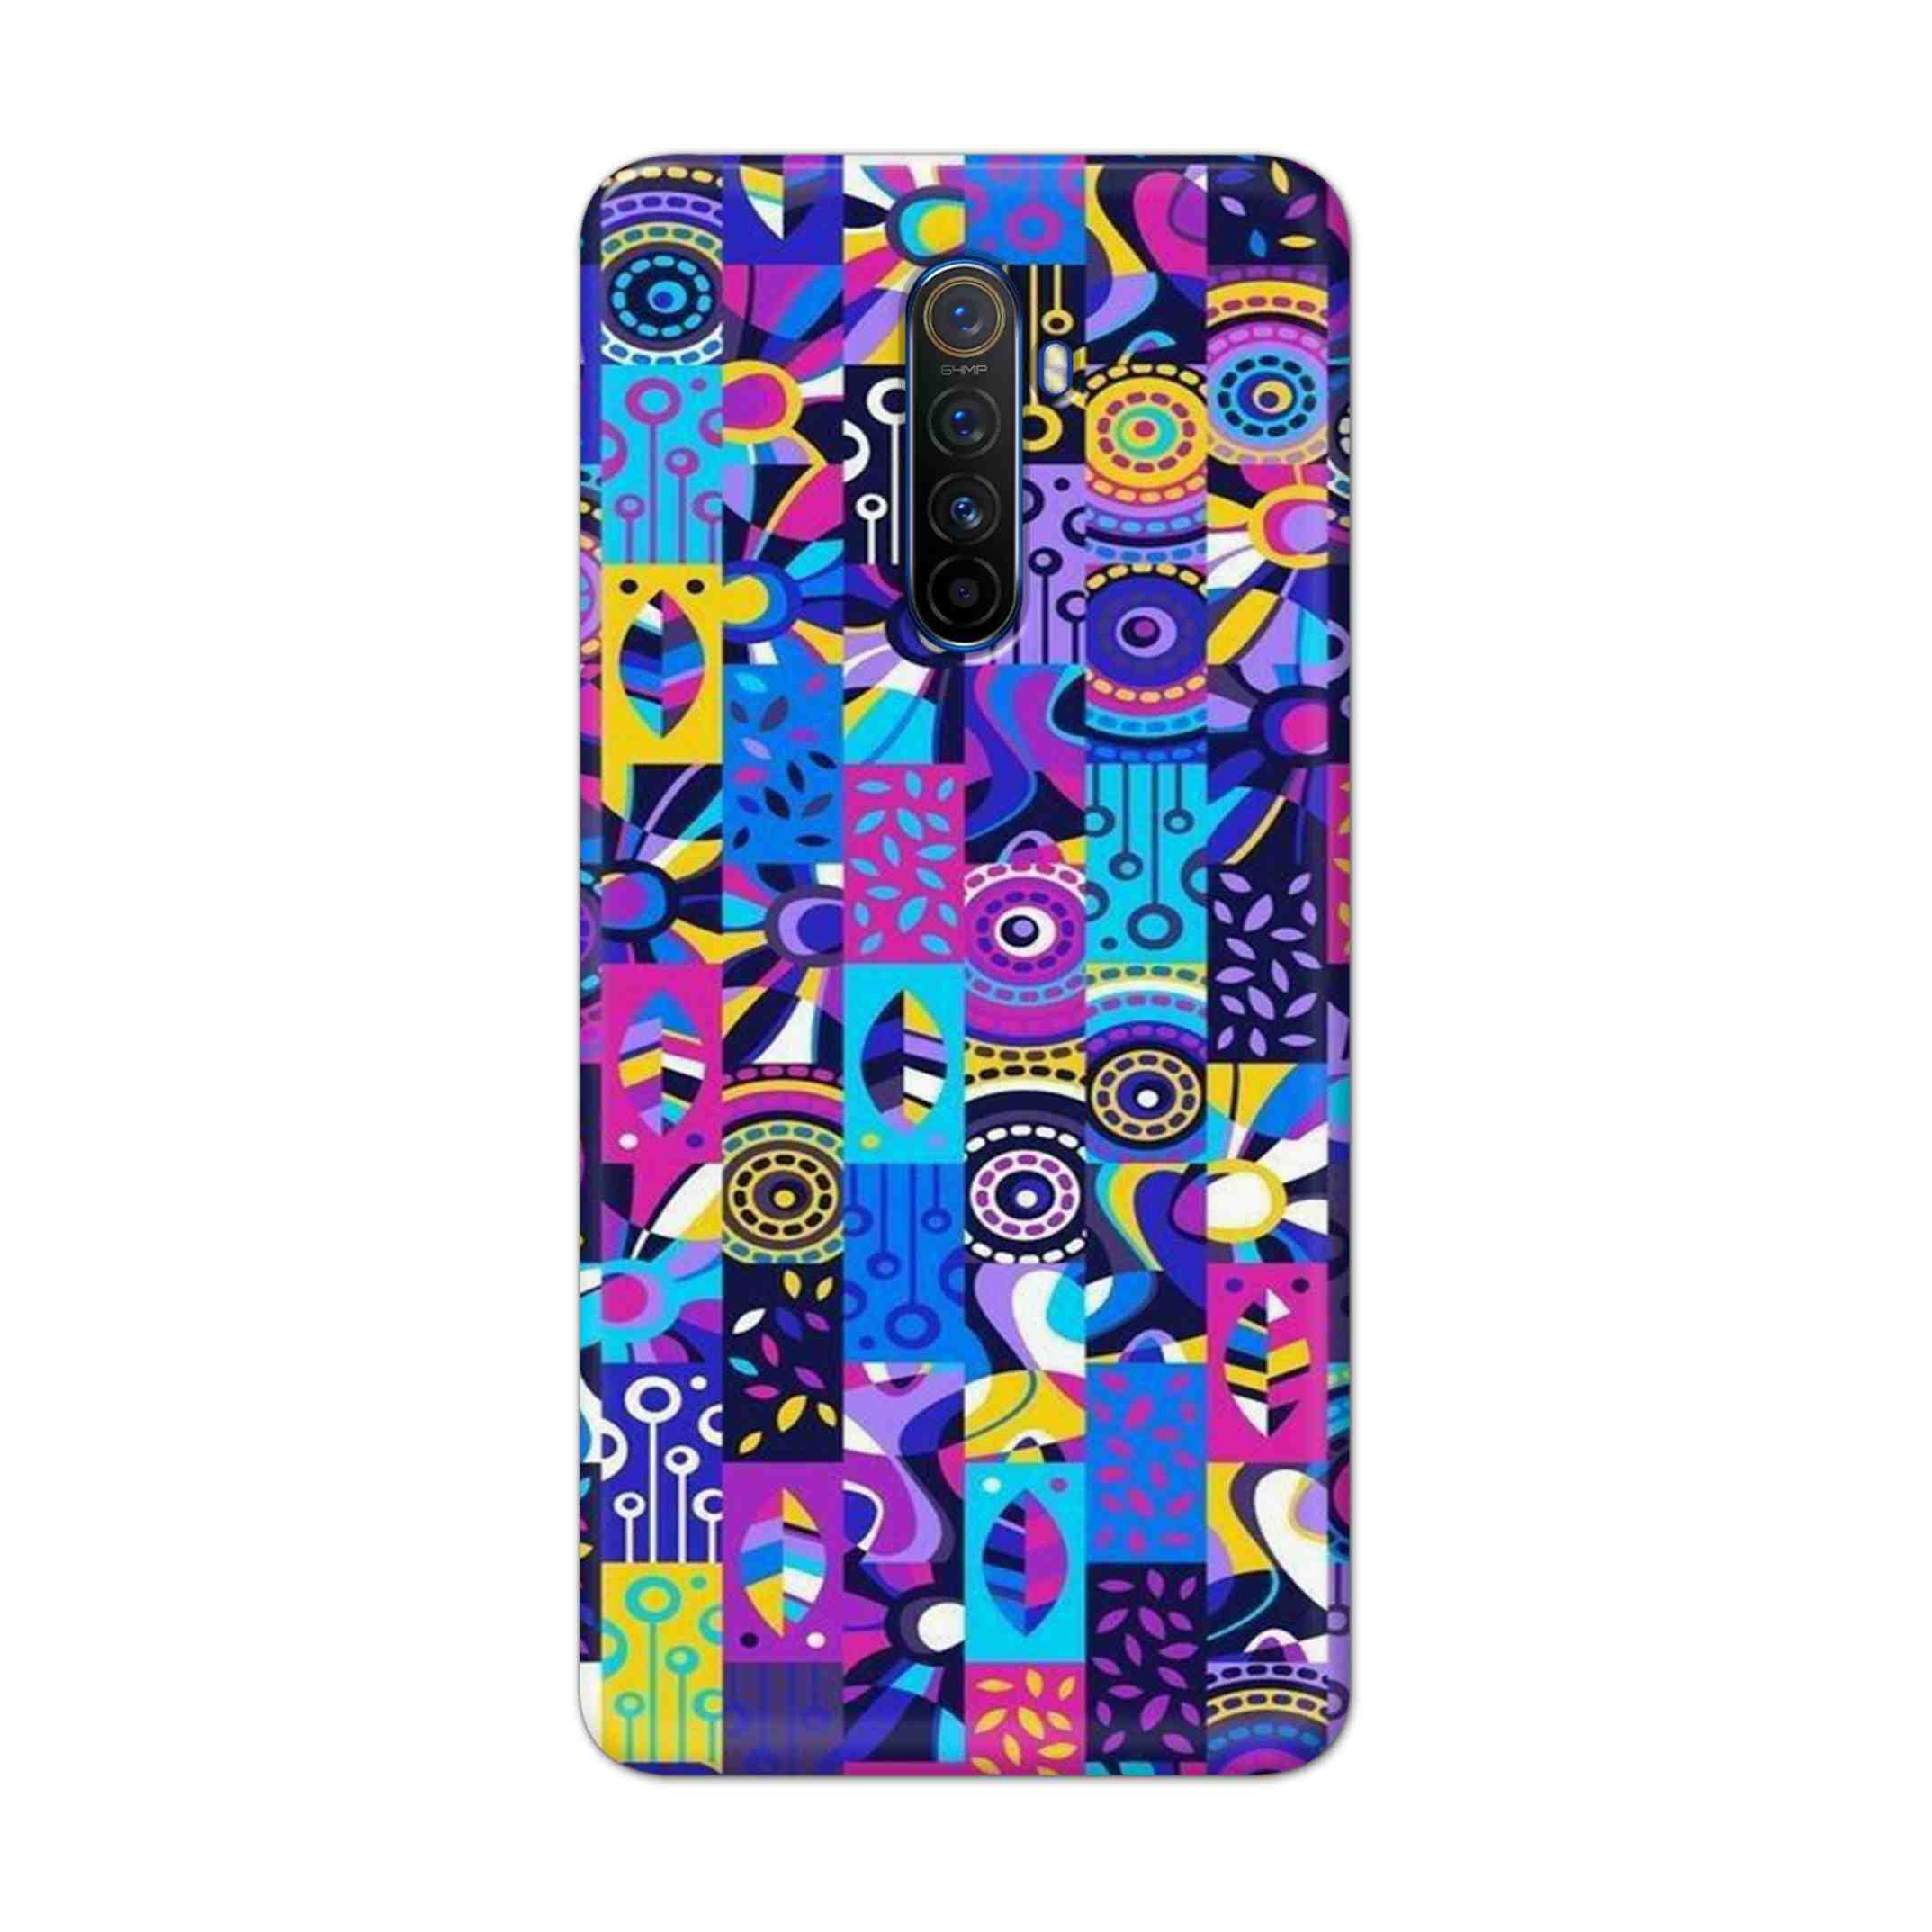 Buy Rainbow Art Hard Back Mobile Phone Case Cover For Realme X2 Pro Online